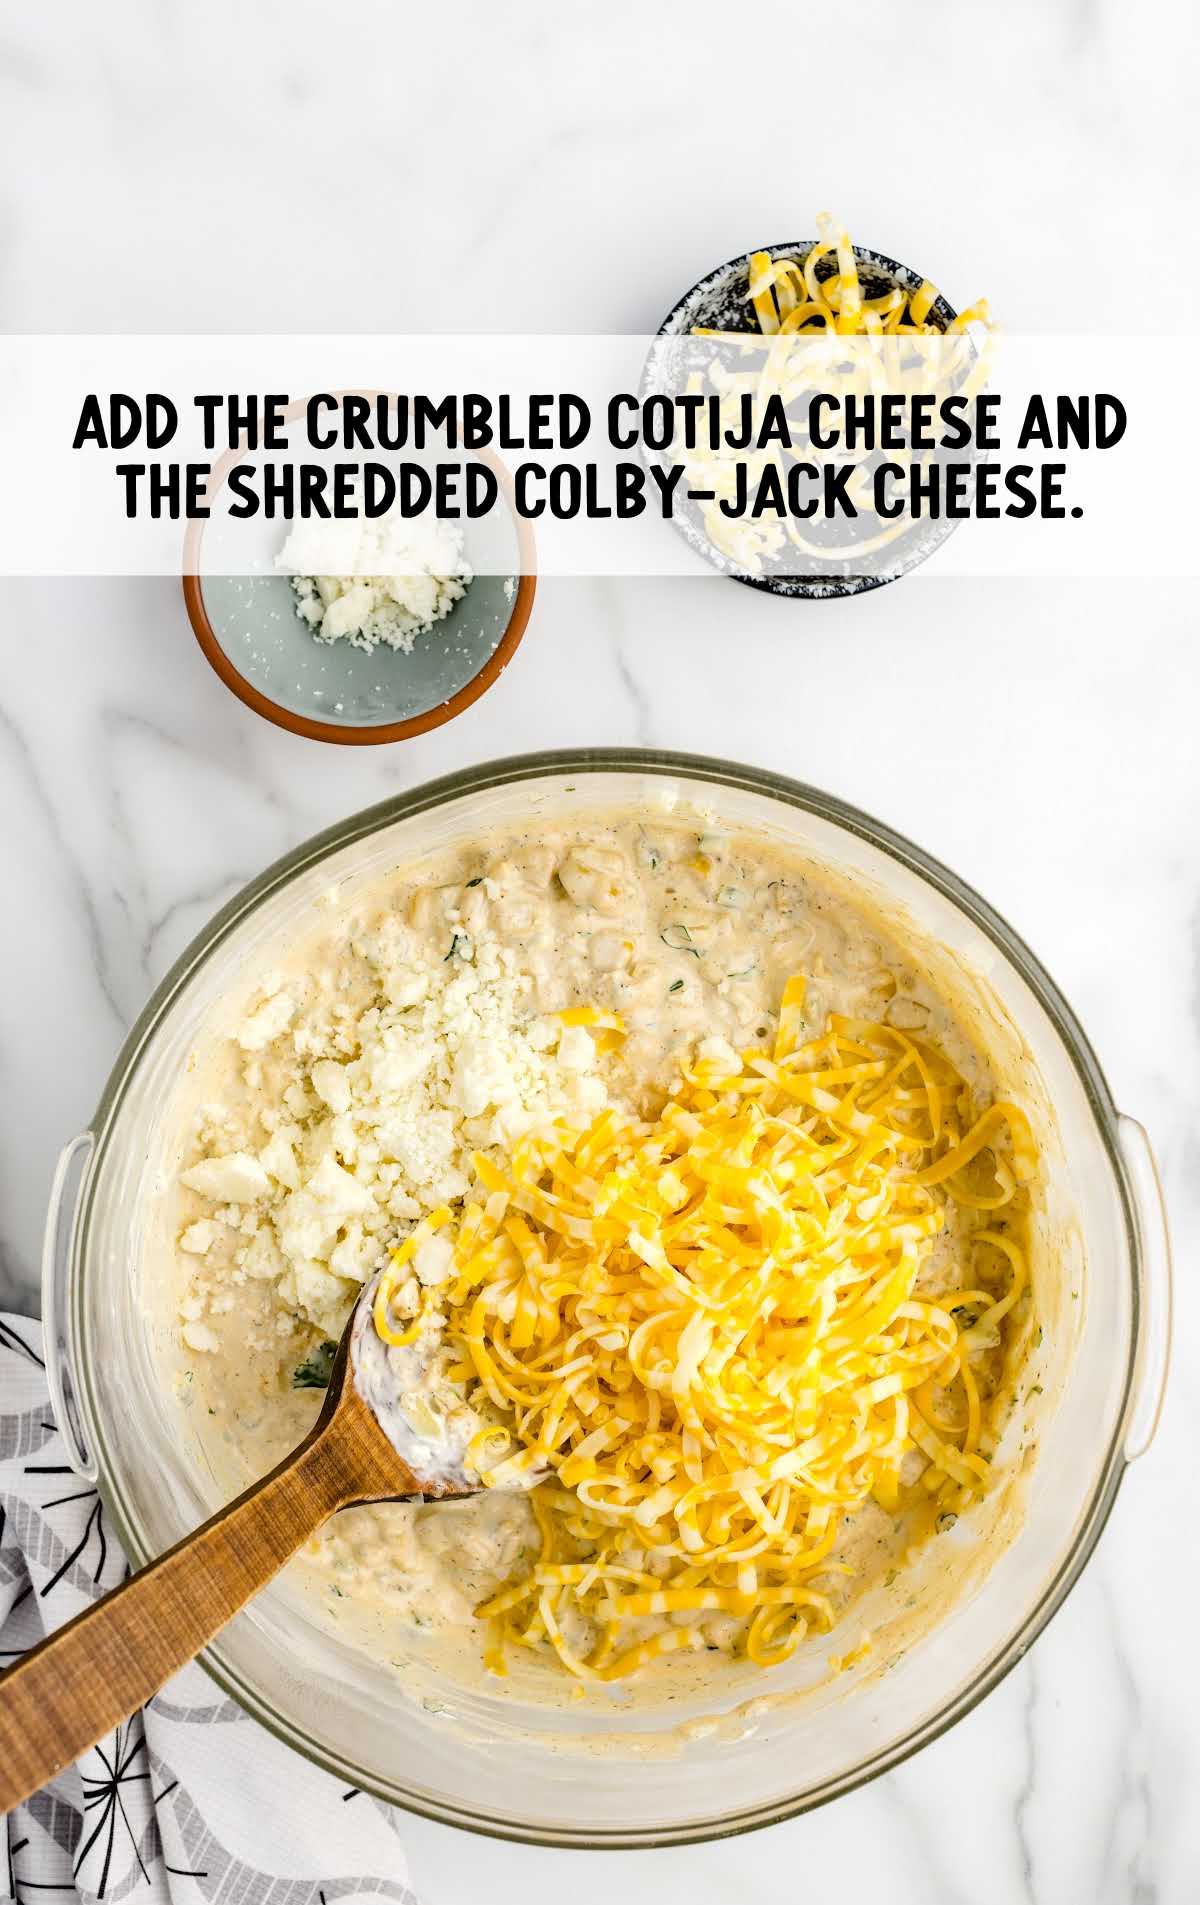 crumbled cotija cheese and shredded Colby jack cheese added to the ingredients in the bowl